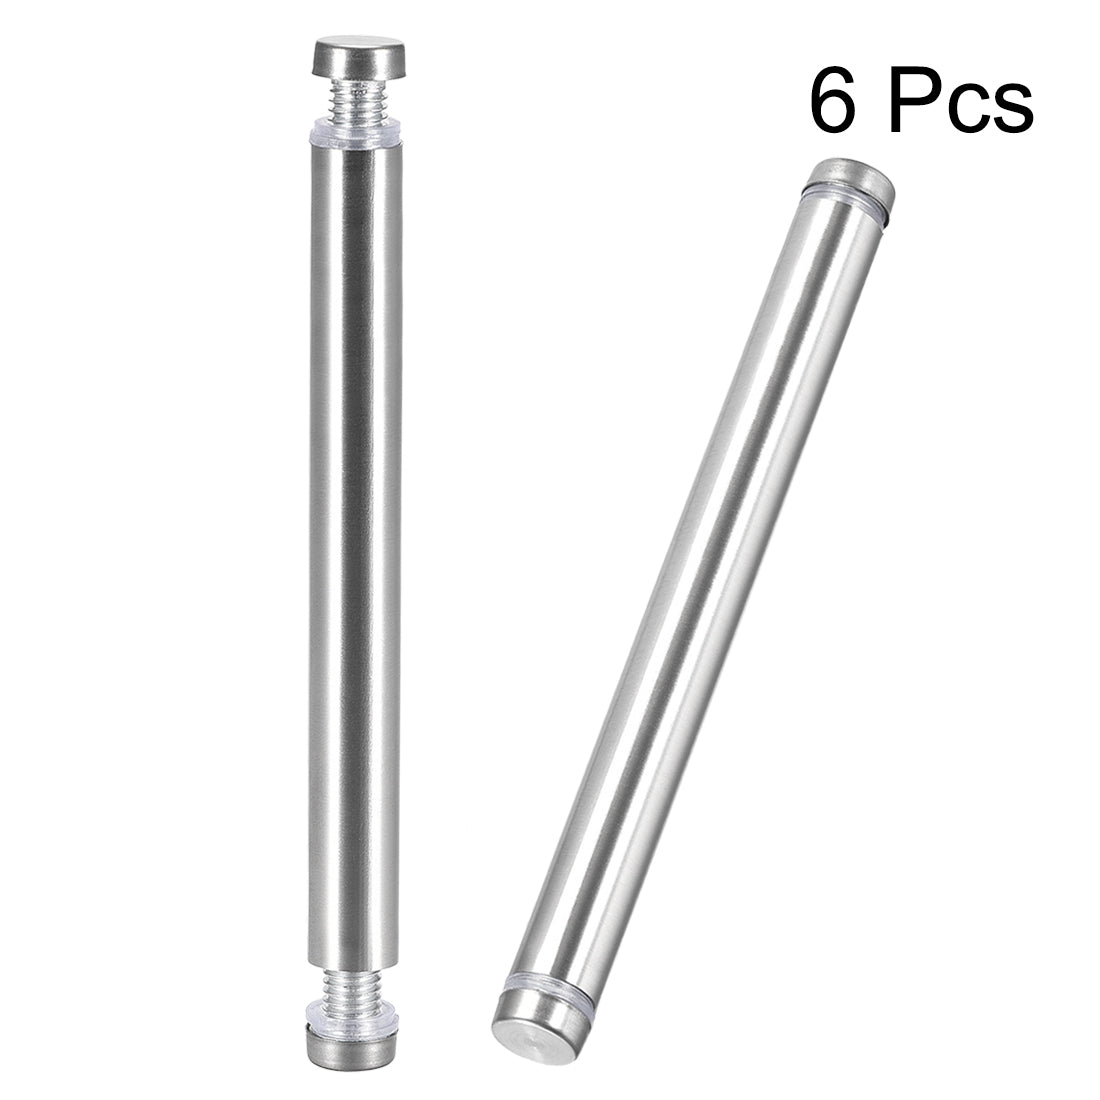 uxcell Uxcell Glass Standoff Double Head Stainless Steel Standoff Holder 12mm x 124mm 6 Pcs